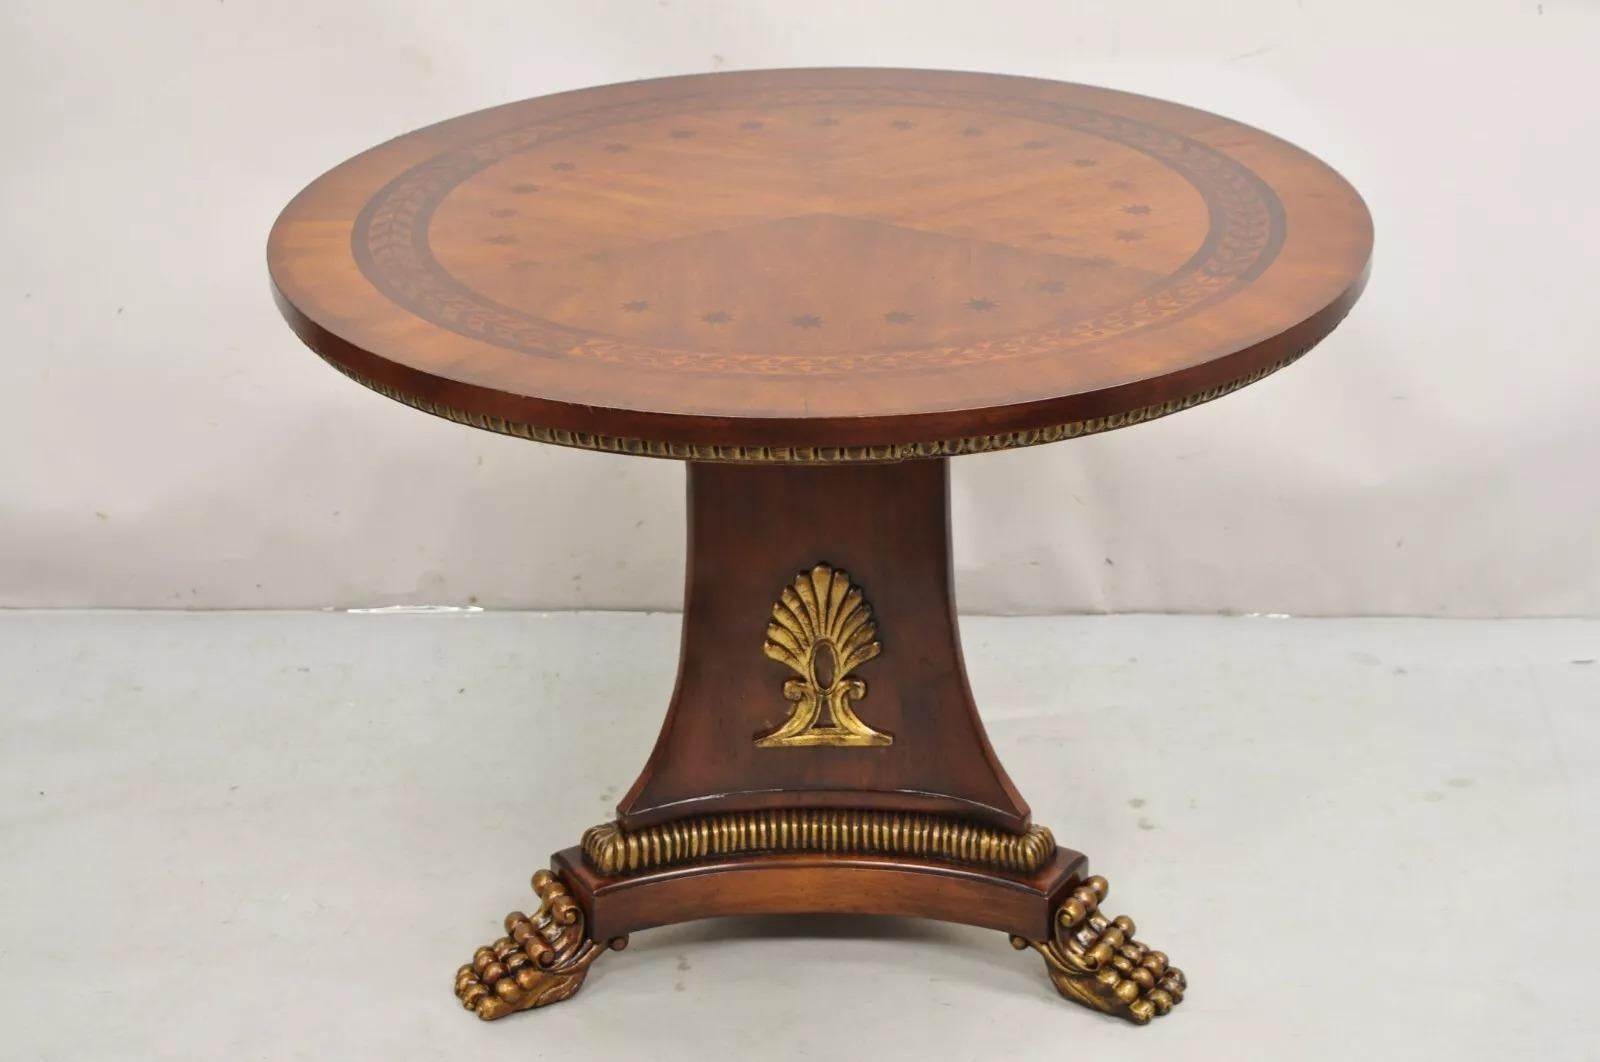 Italian Regency Style Marquetry Inlay Paw Foot Pedestal Base Round Center Table. Item features a nice inlaid top, tripod carved paw foot base, very stately center table. Circa Late 20th Century. Measurements: 29.5